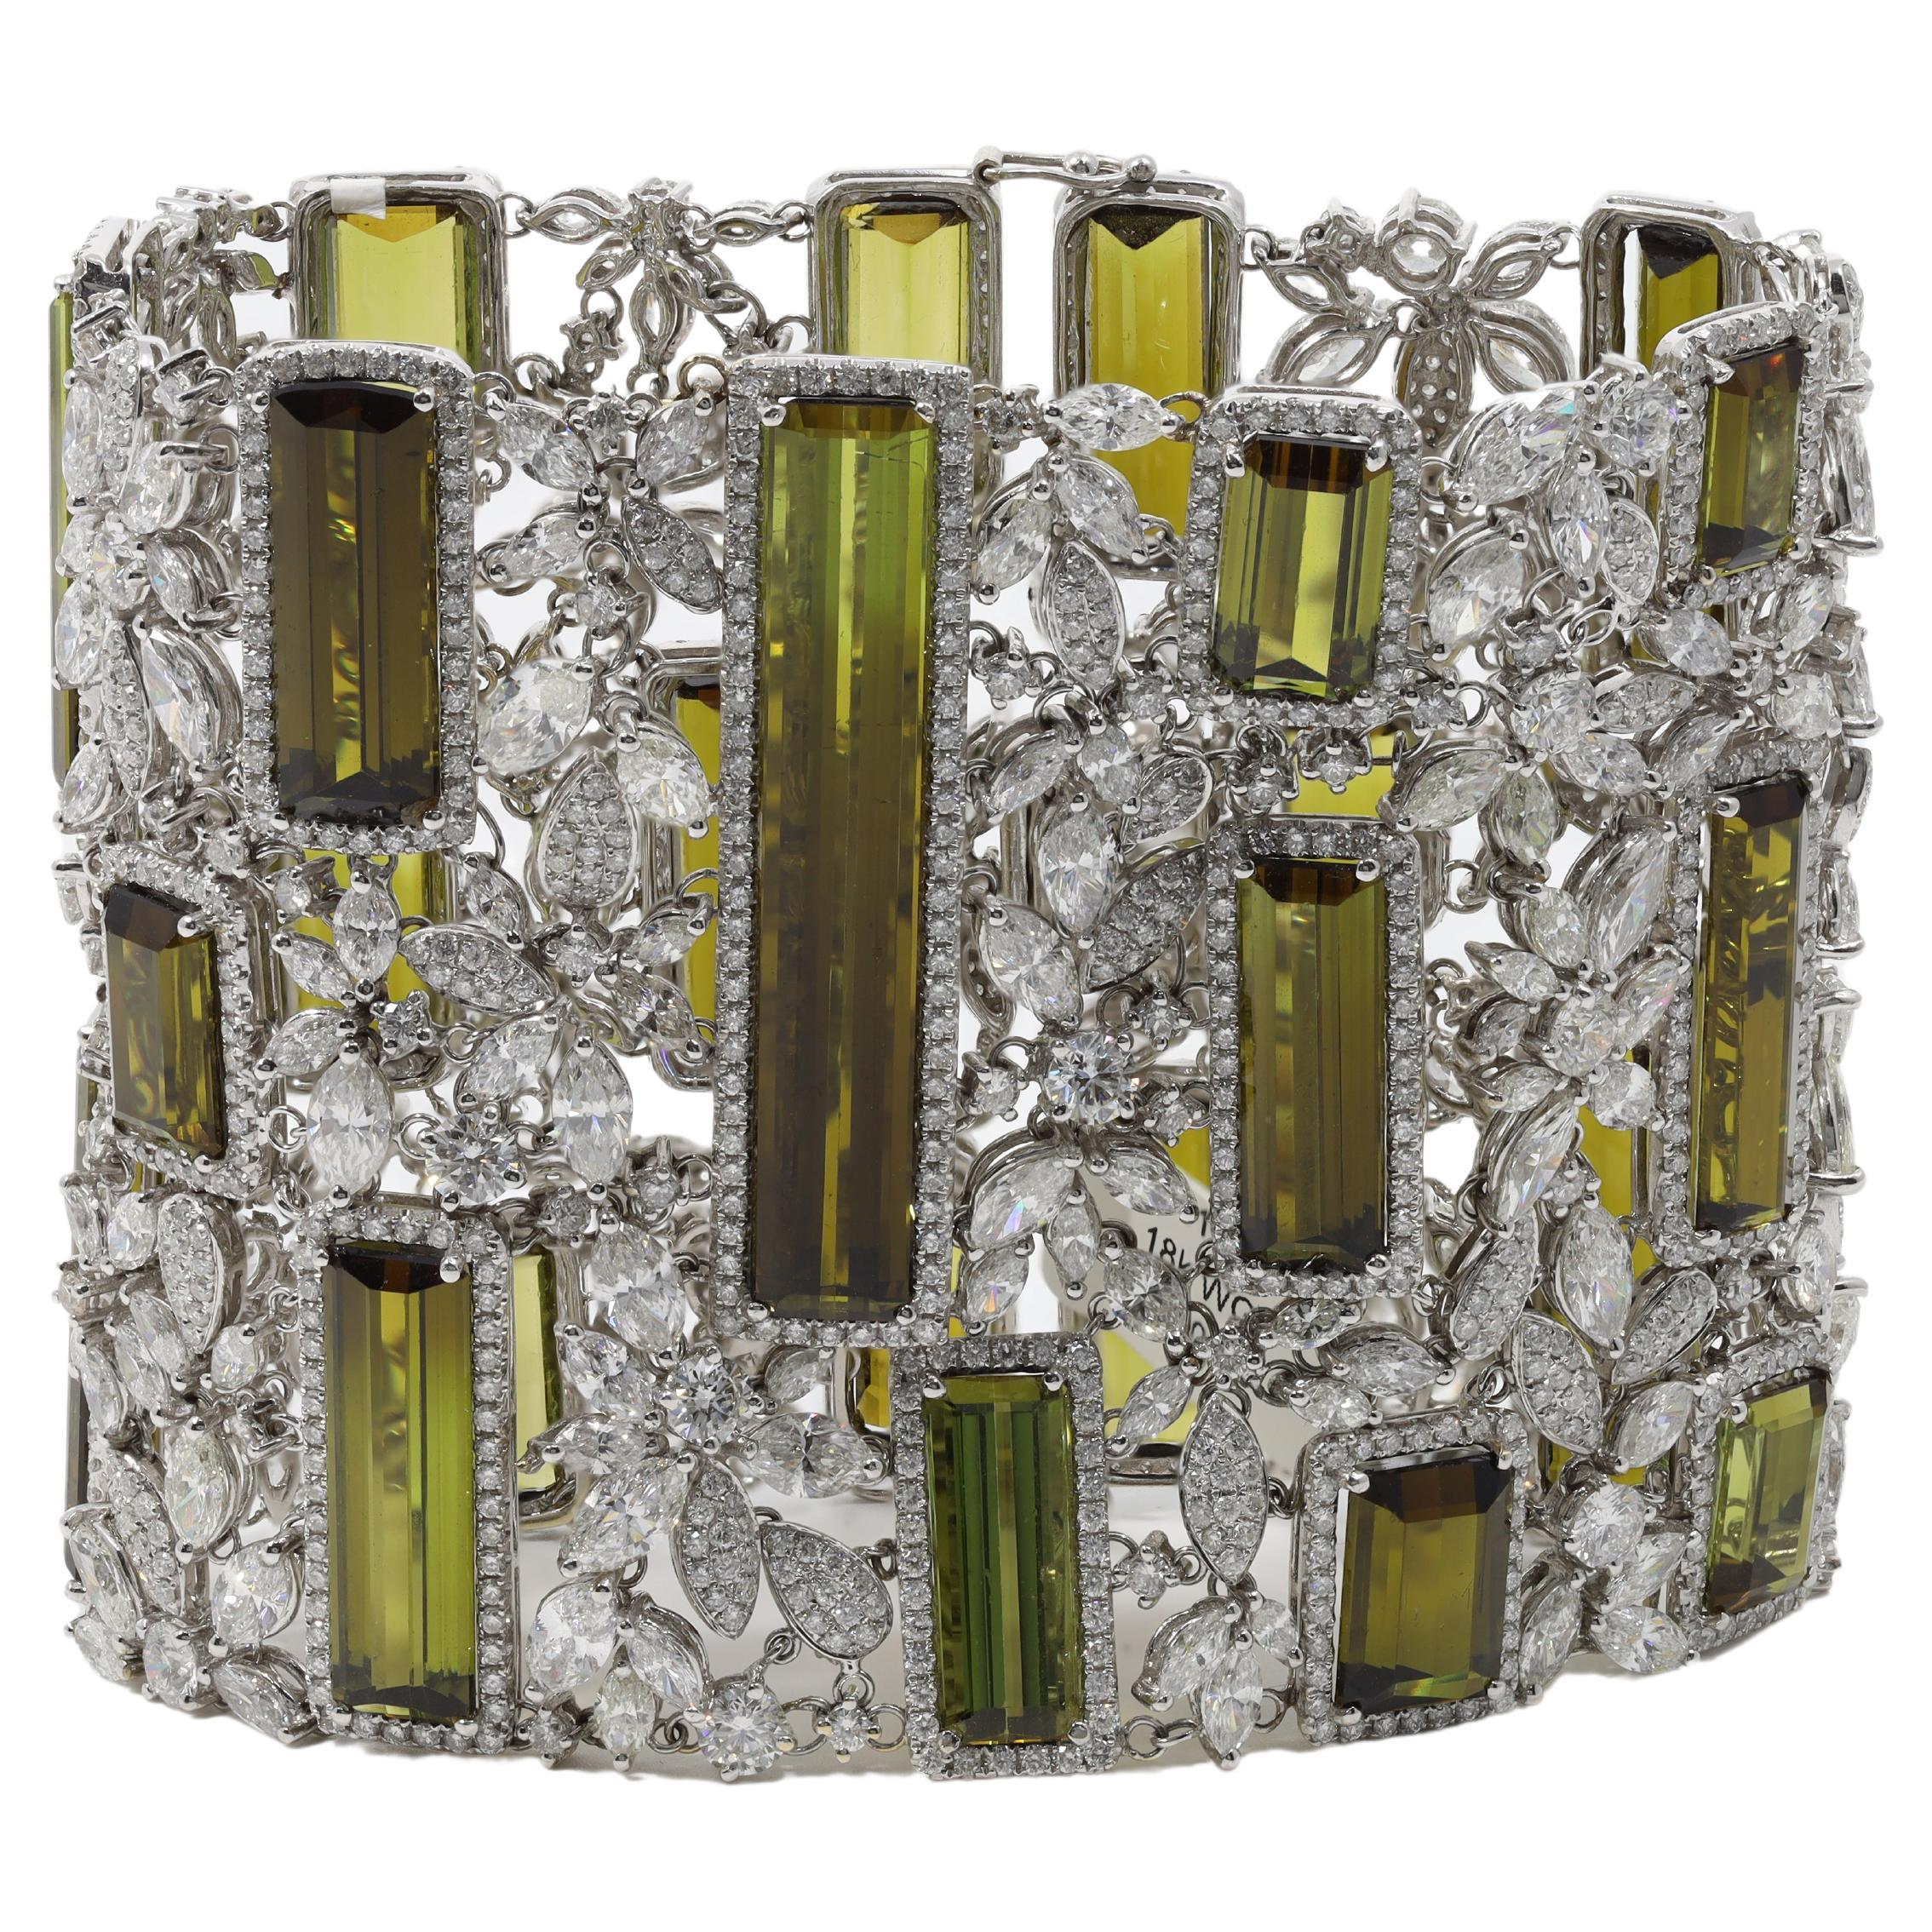 18kt white gold bracelet featuring 131.84 cts of peridot surrounded by marquise and round brilliant cut diamonds

Diana M. is a leading supplier of top-quality fine jewelry for over 35 years.
Diana M is one-stop shop for all your jewelry shopping,